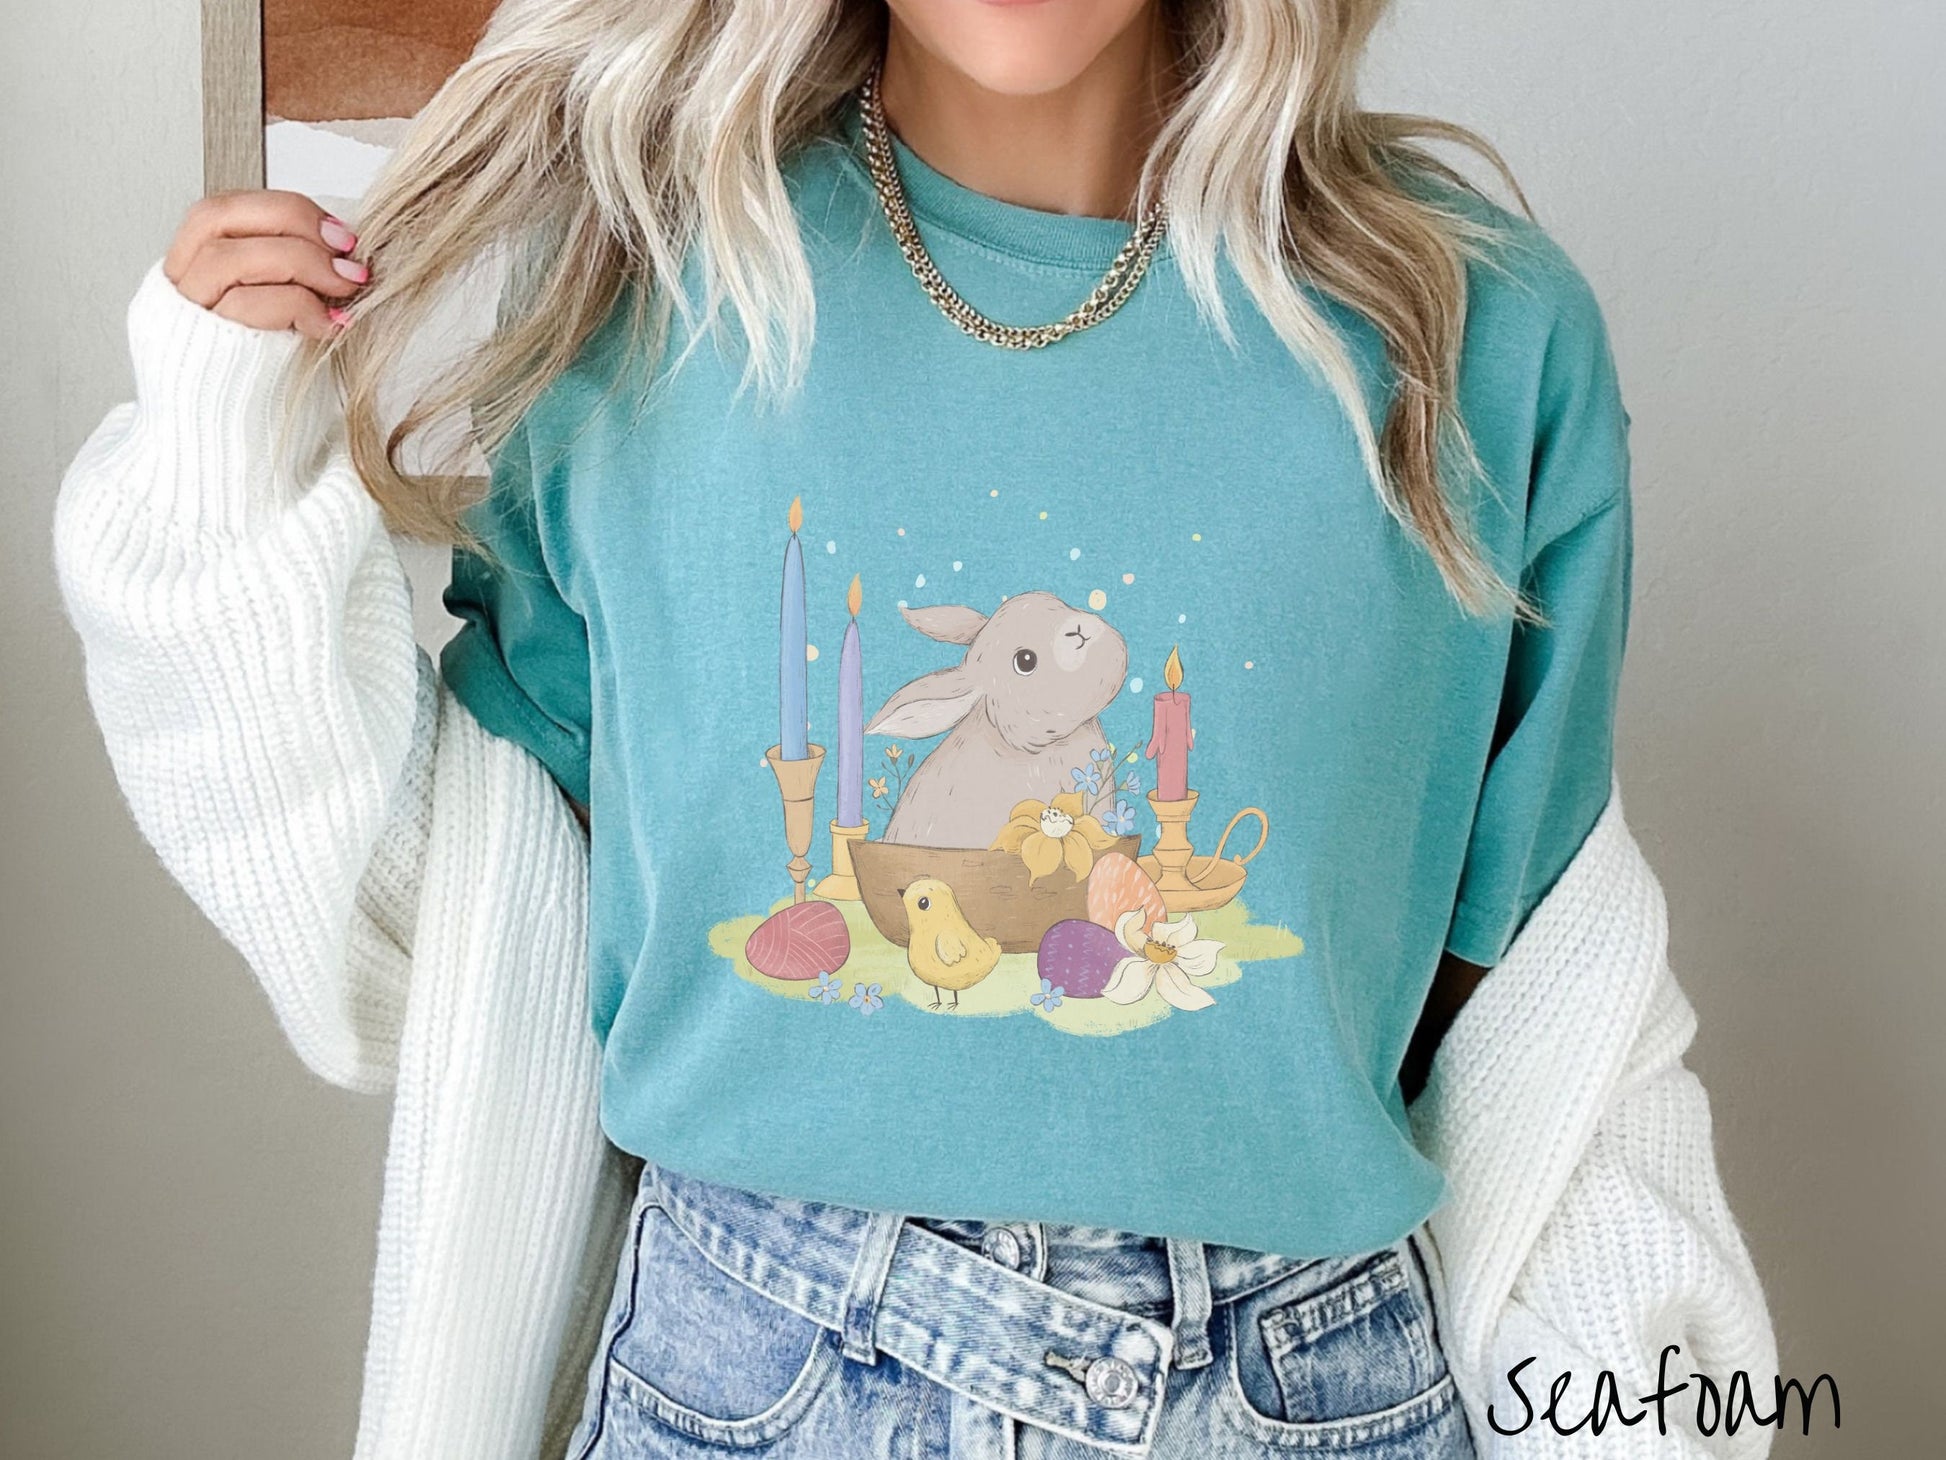 A woman wearing a cute, vintage seafoam colored shirt with a gray bunny rabbit sitting in between three lit candles, some red, orange, and purple eggs, and yellow and white flowers.